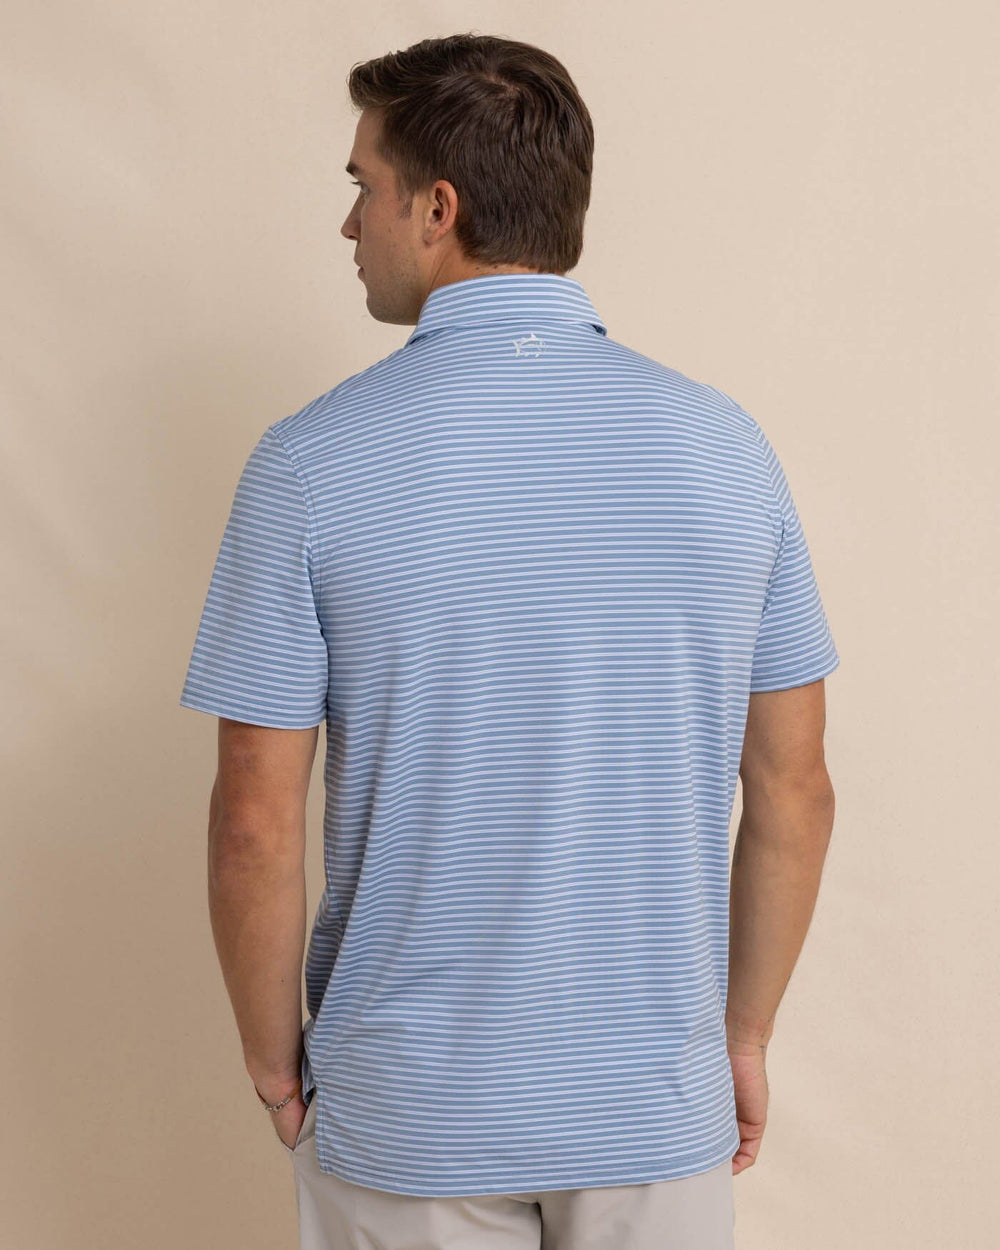 The back view of the Southern Tide brrr eeze Beattie Stripe Performance Polo by Southern Tide - Windward Blue